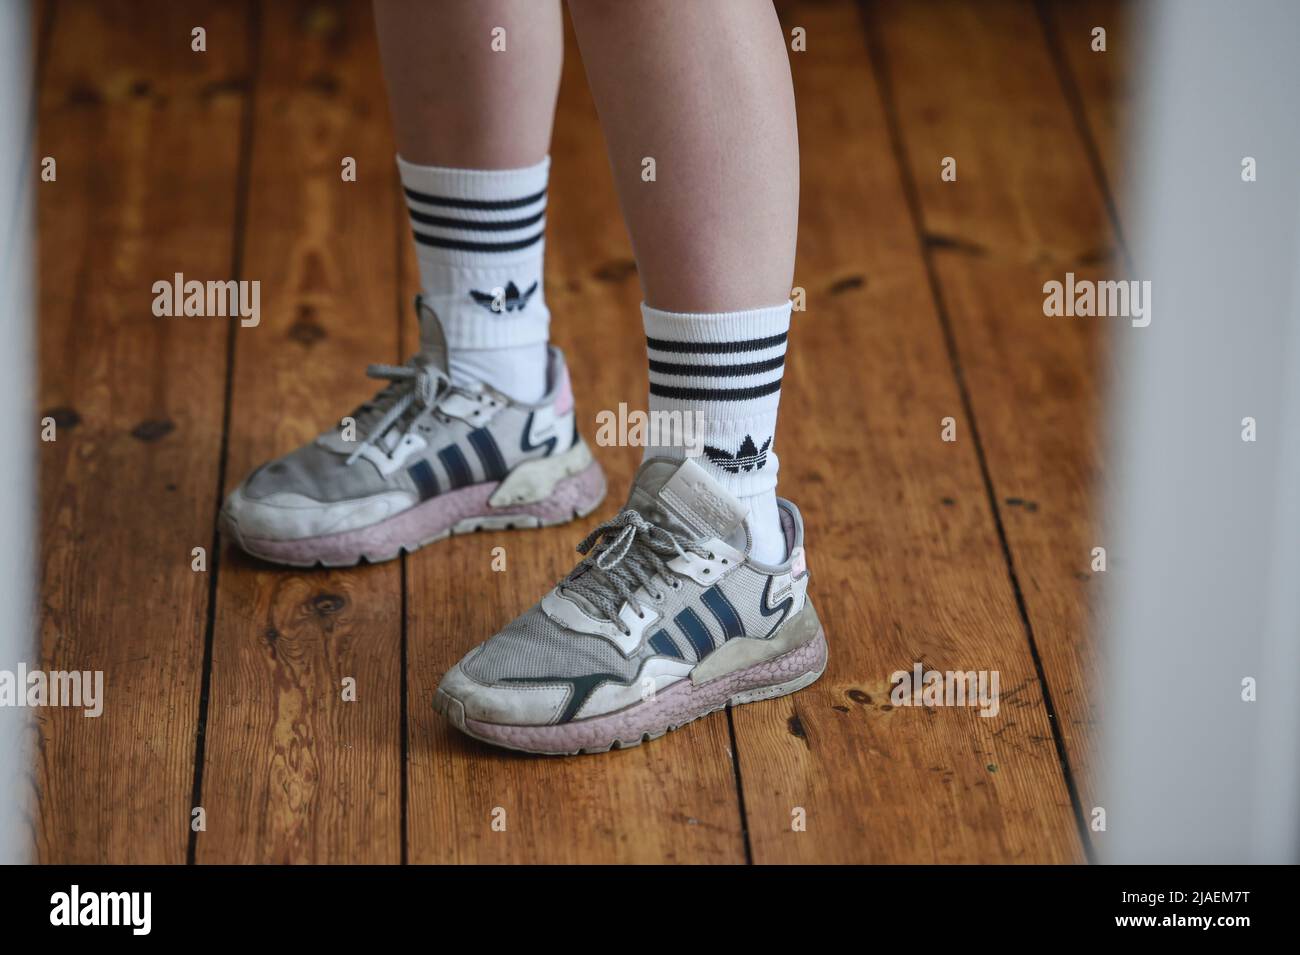 Berlin, Germany. 27th May, 2022. Socks adidas brand are worn in adidas  sneakers. Short socks were in for years. This year, anyone who thinks  anything of themselves is wearing more fabric with